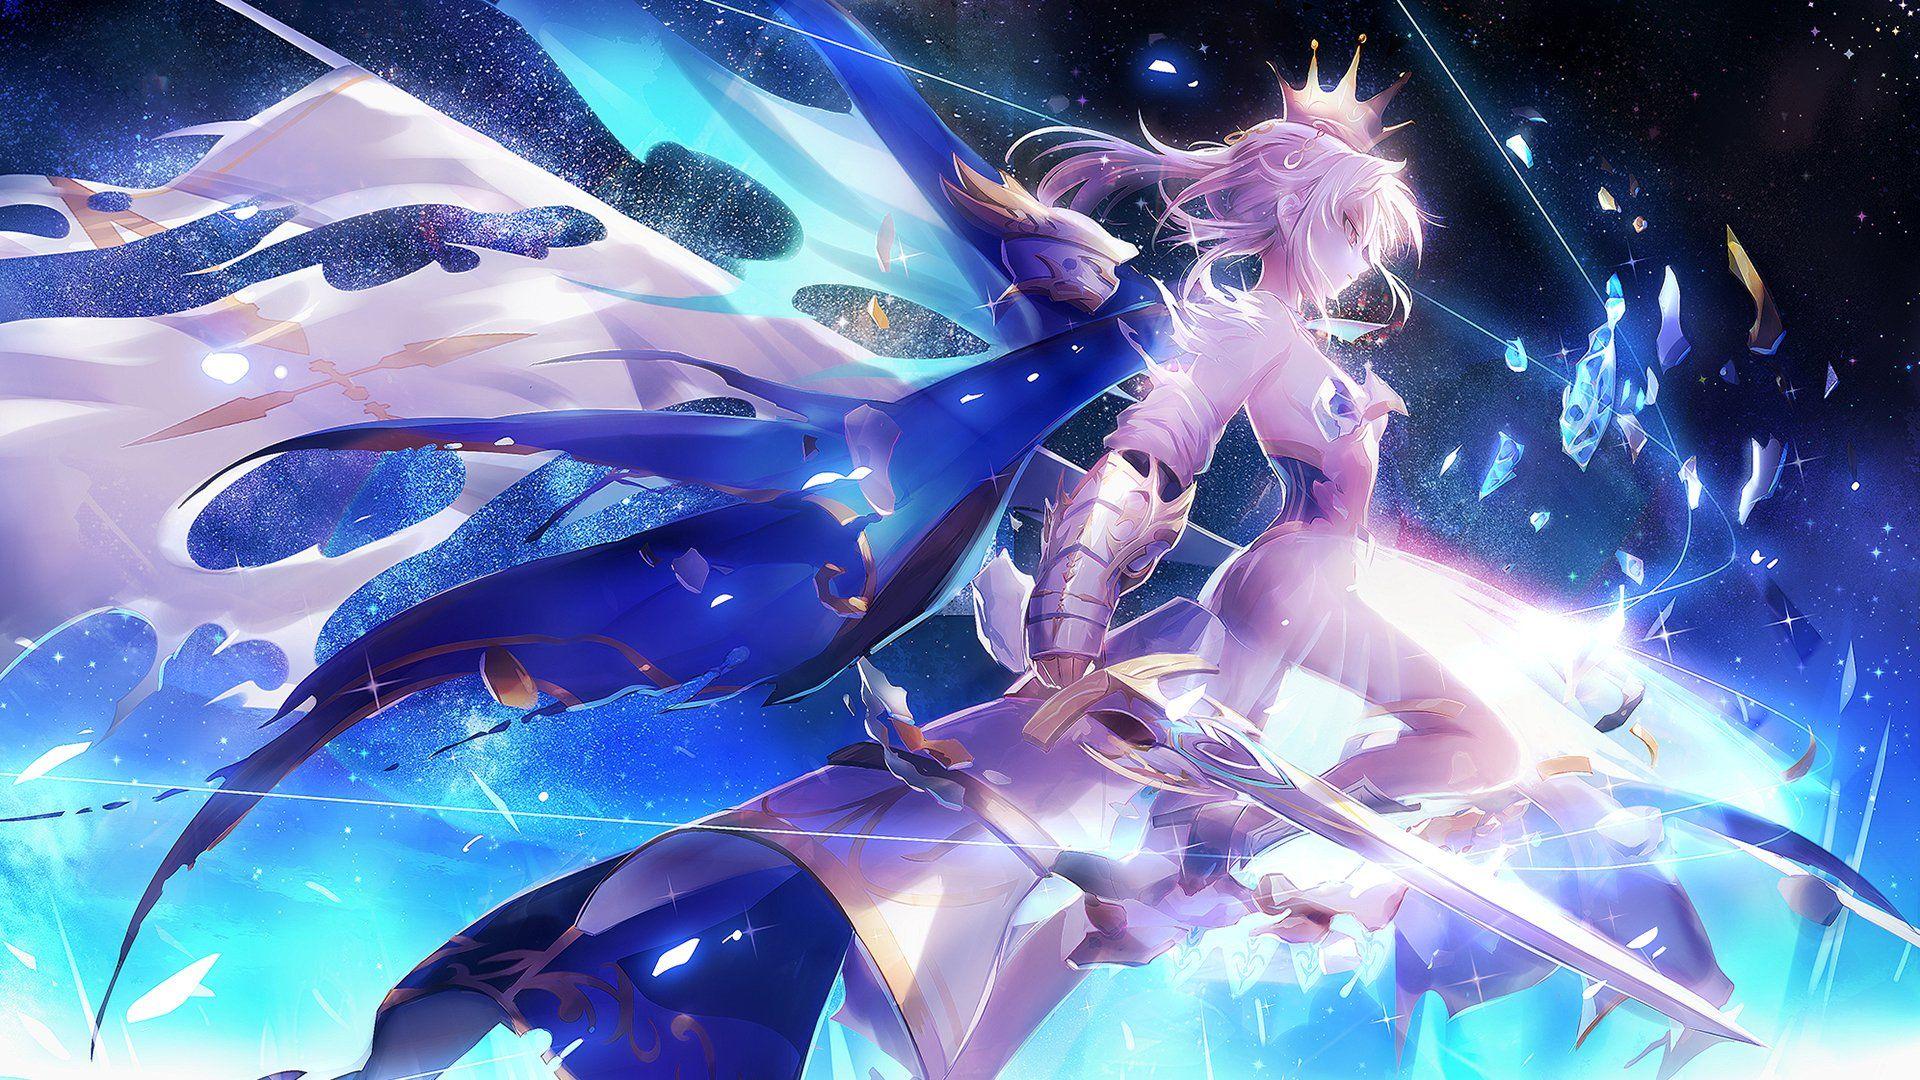 Download Saber (Fate Series) Anime Fate/Stay Night HD Wallpaper by ...